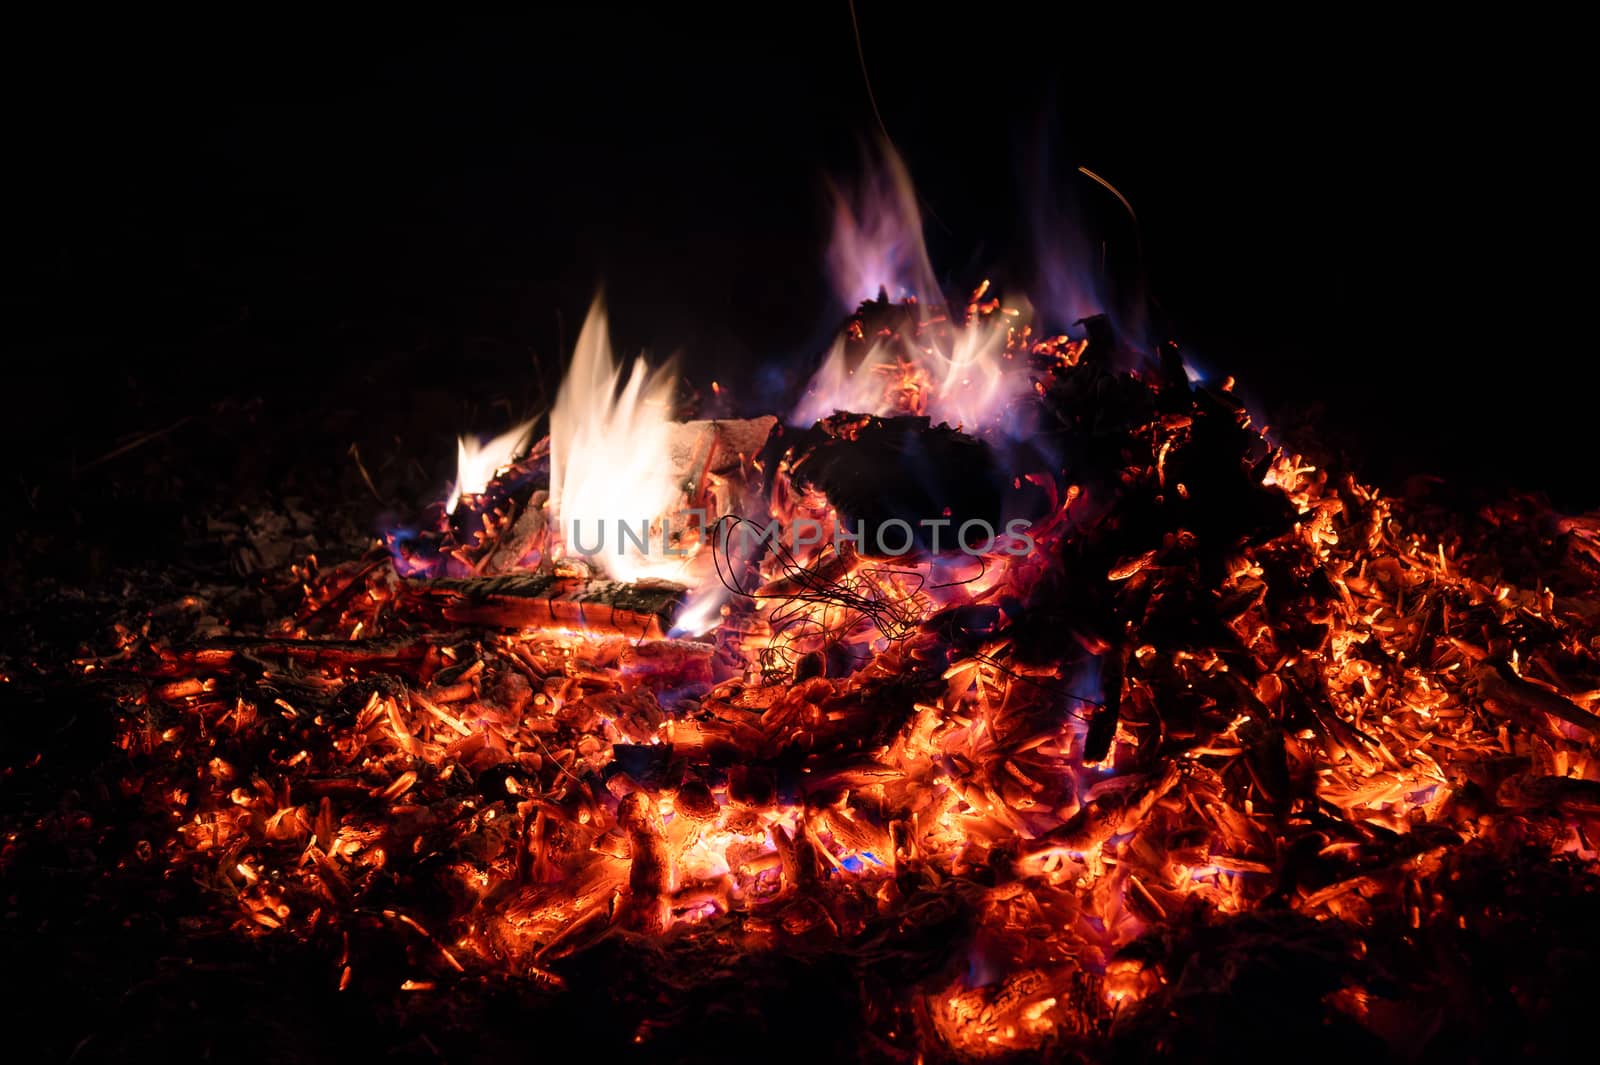 A low light long exposure photo of smouldering coals. by alexsdriver